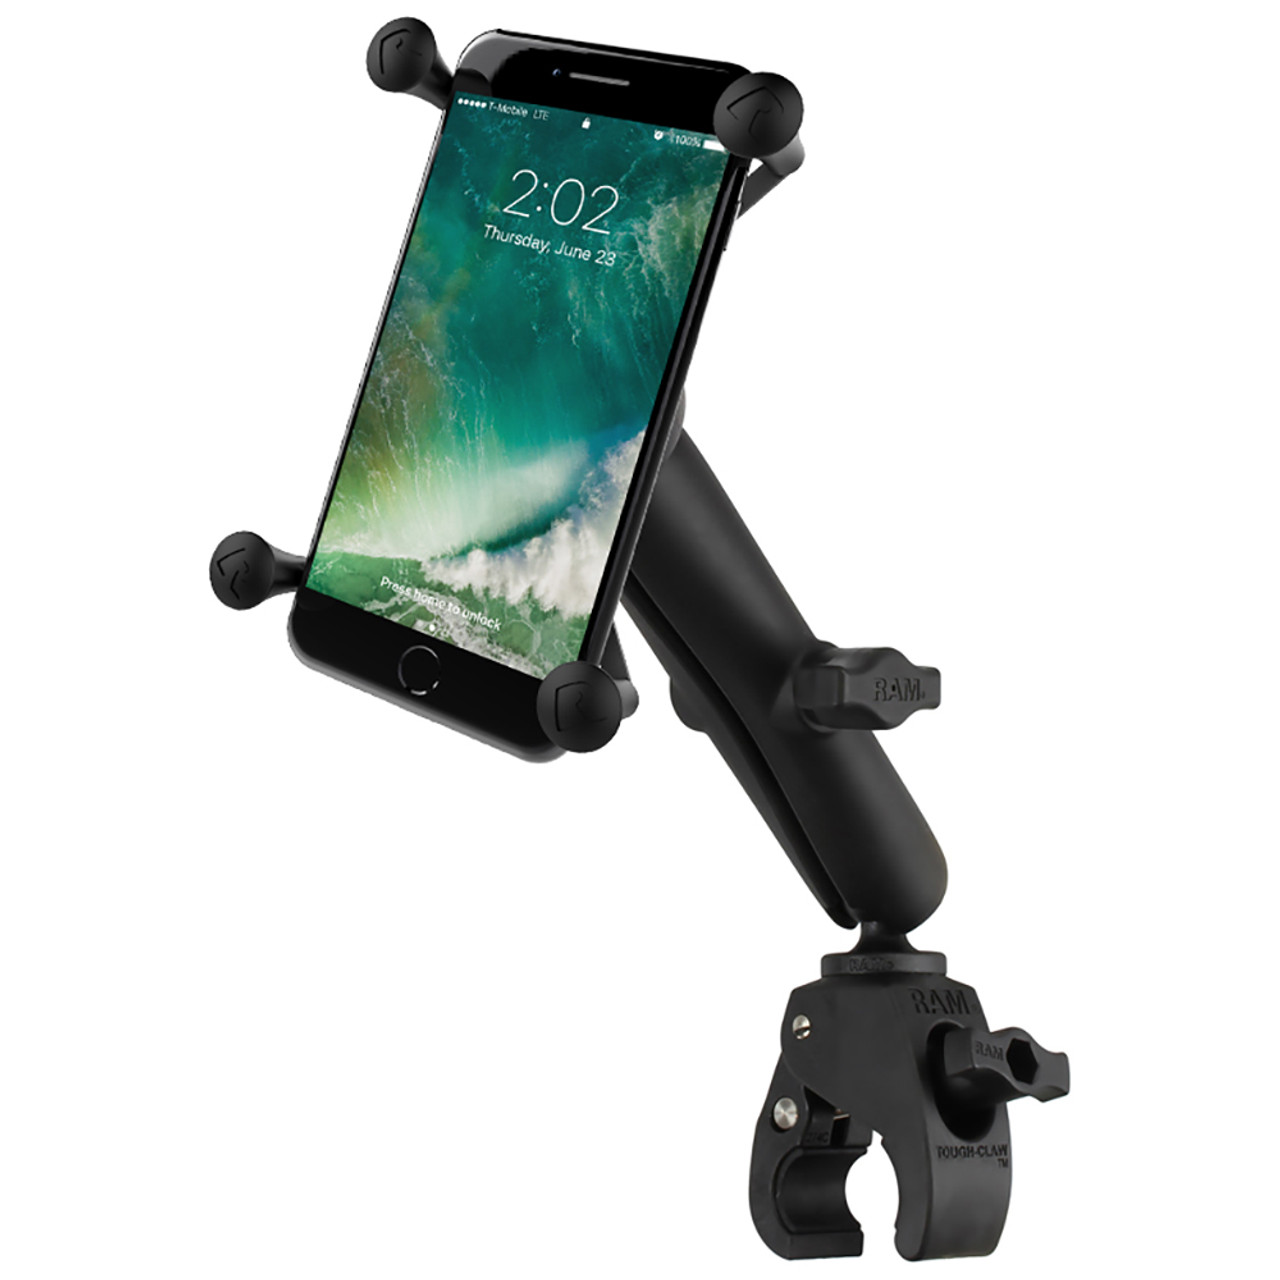 RAM Mount with X Grip clamp for smartphones